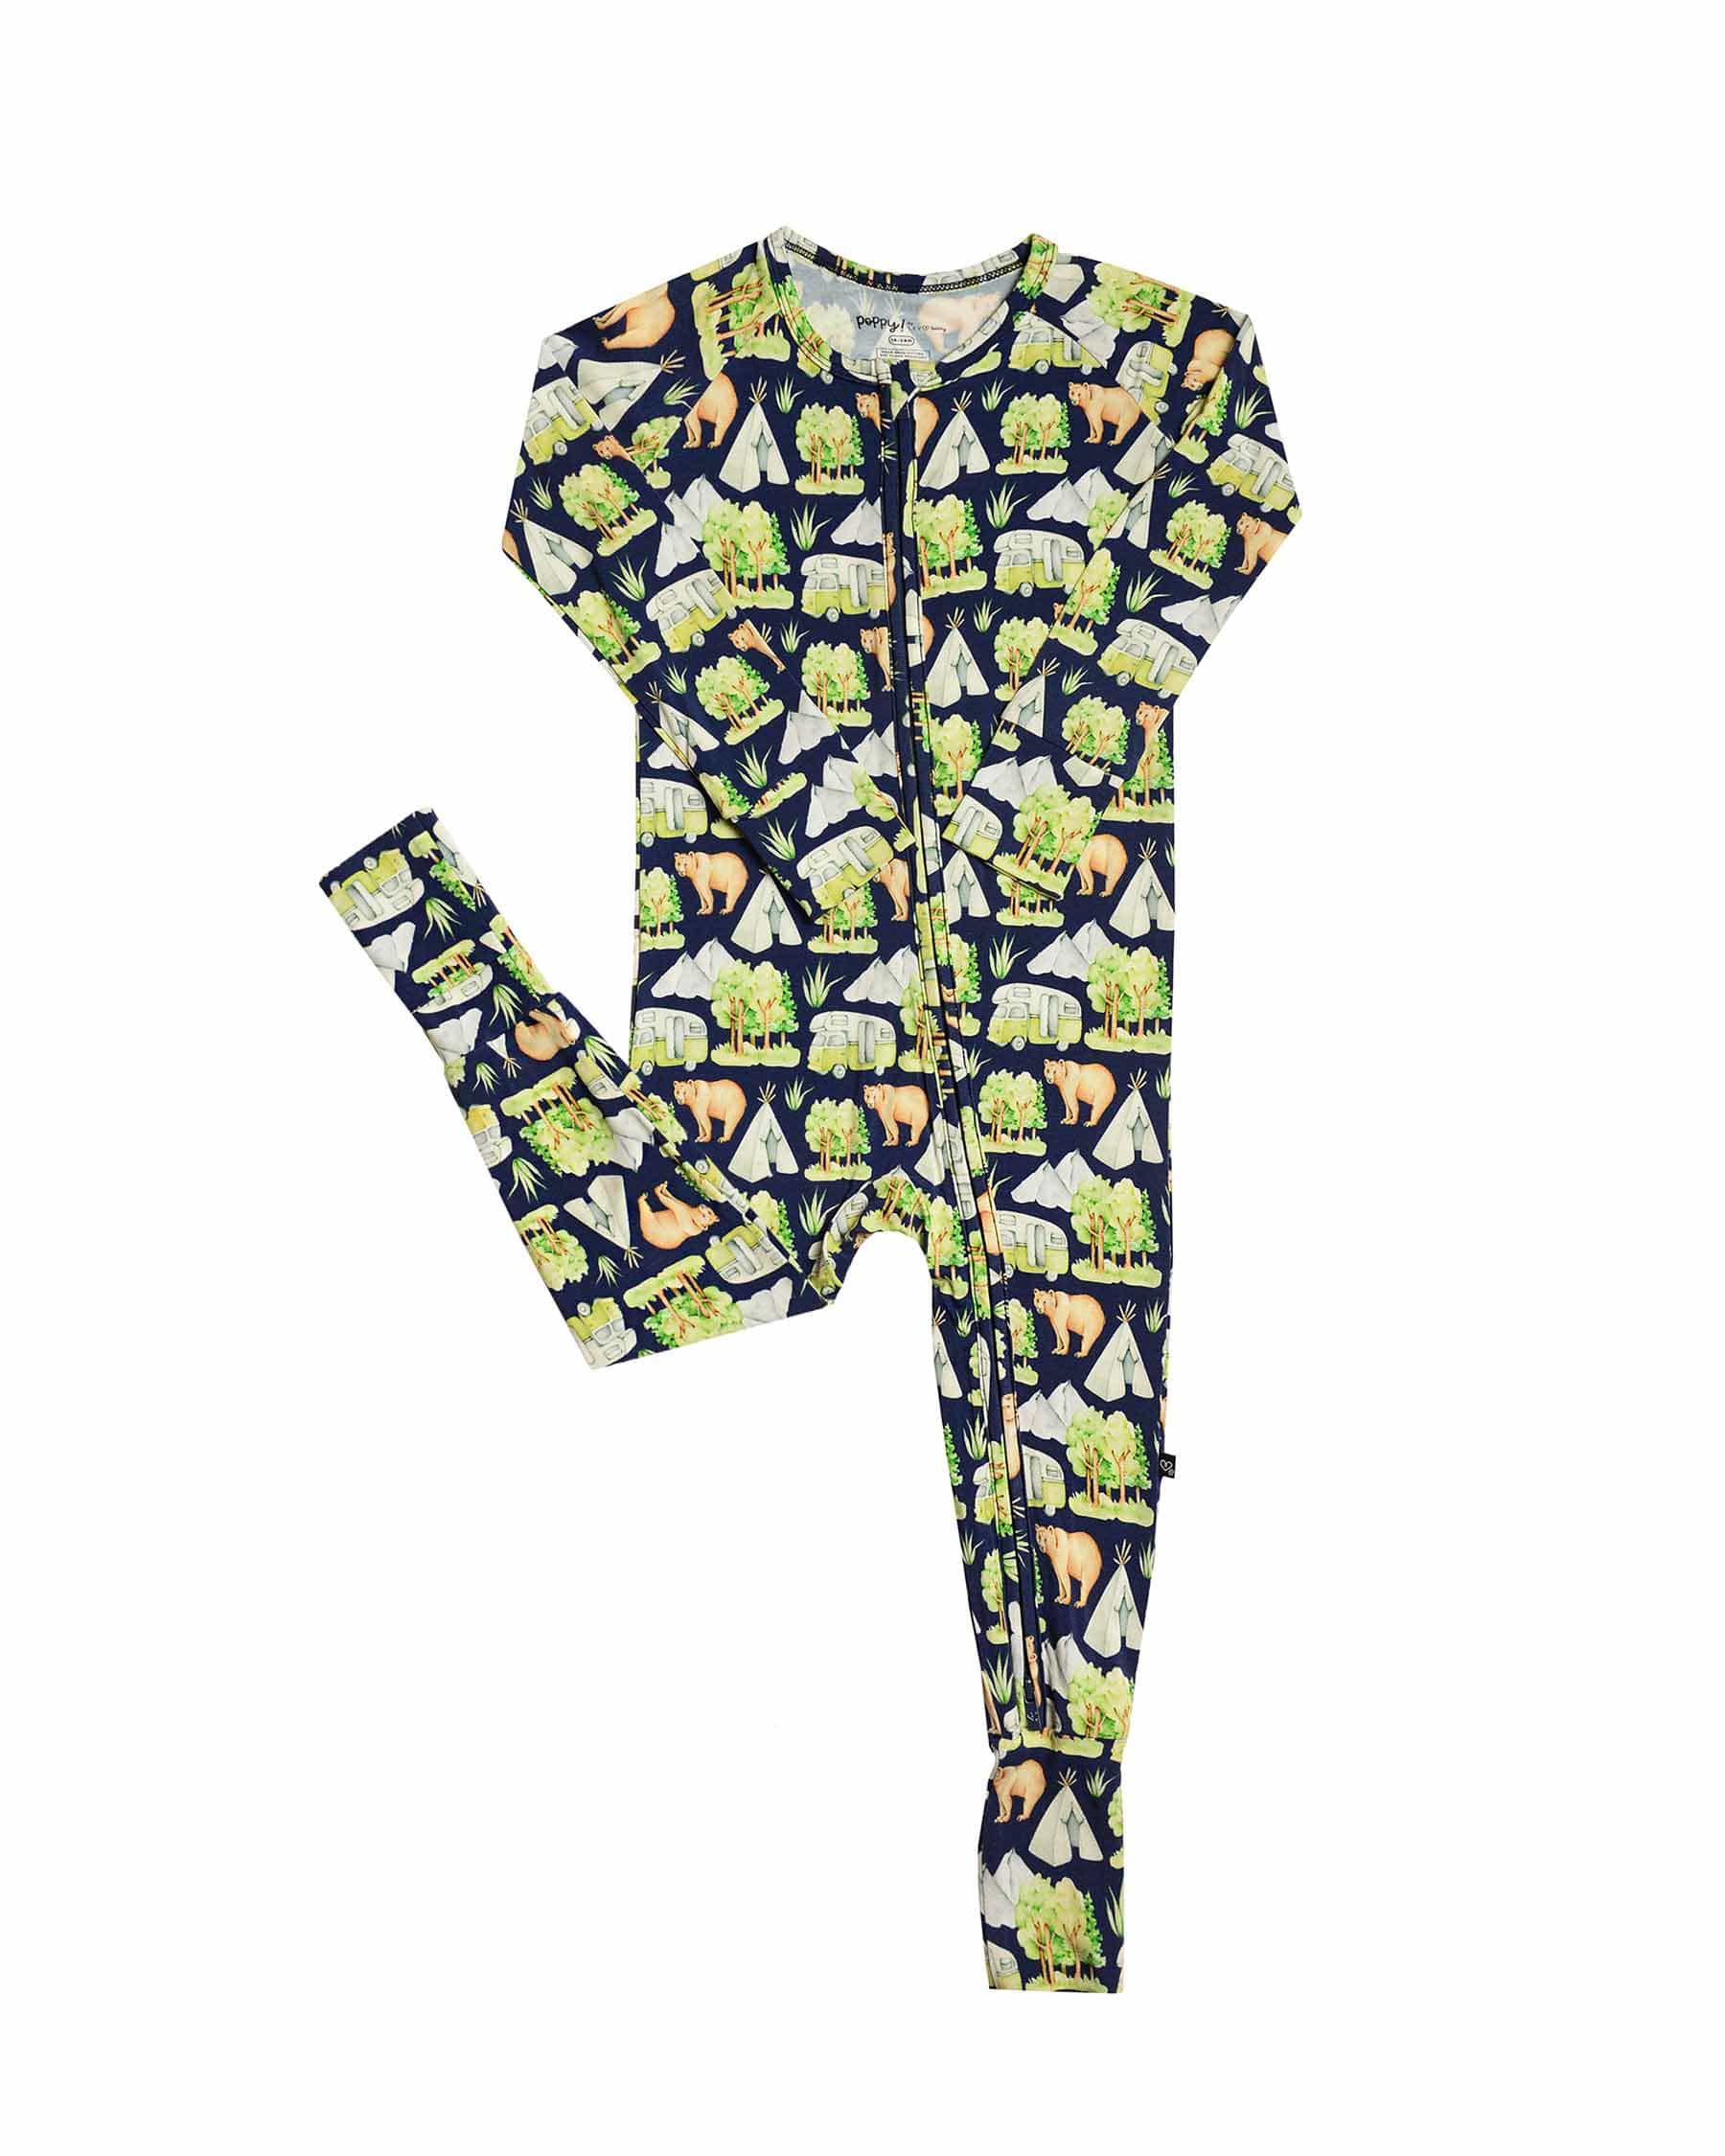 Camping 'Poppy': The Convertible Romper